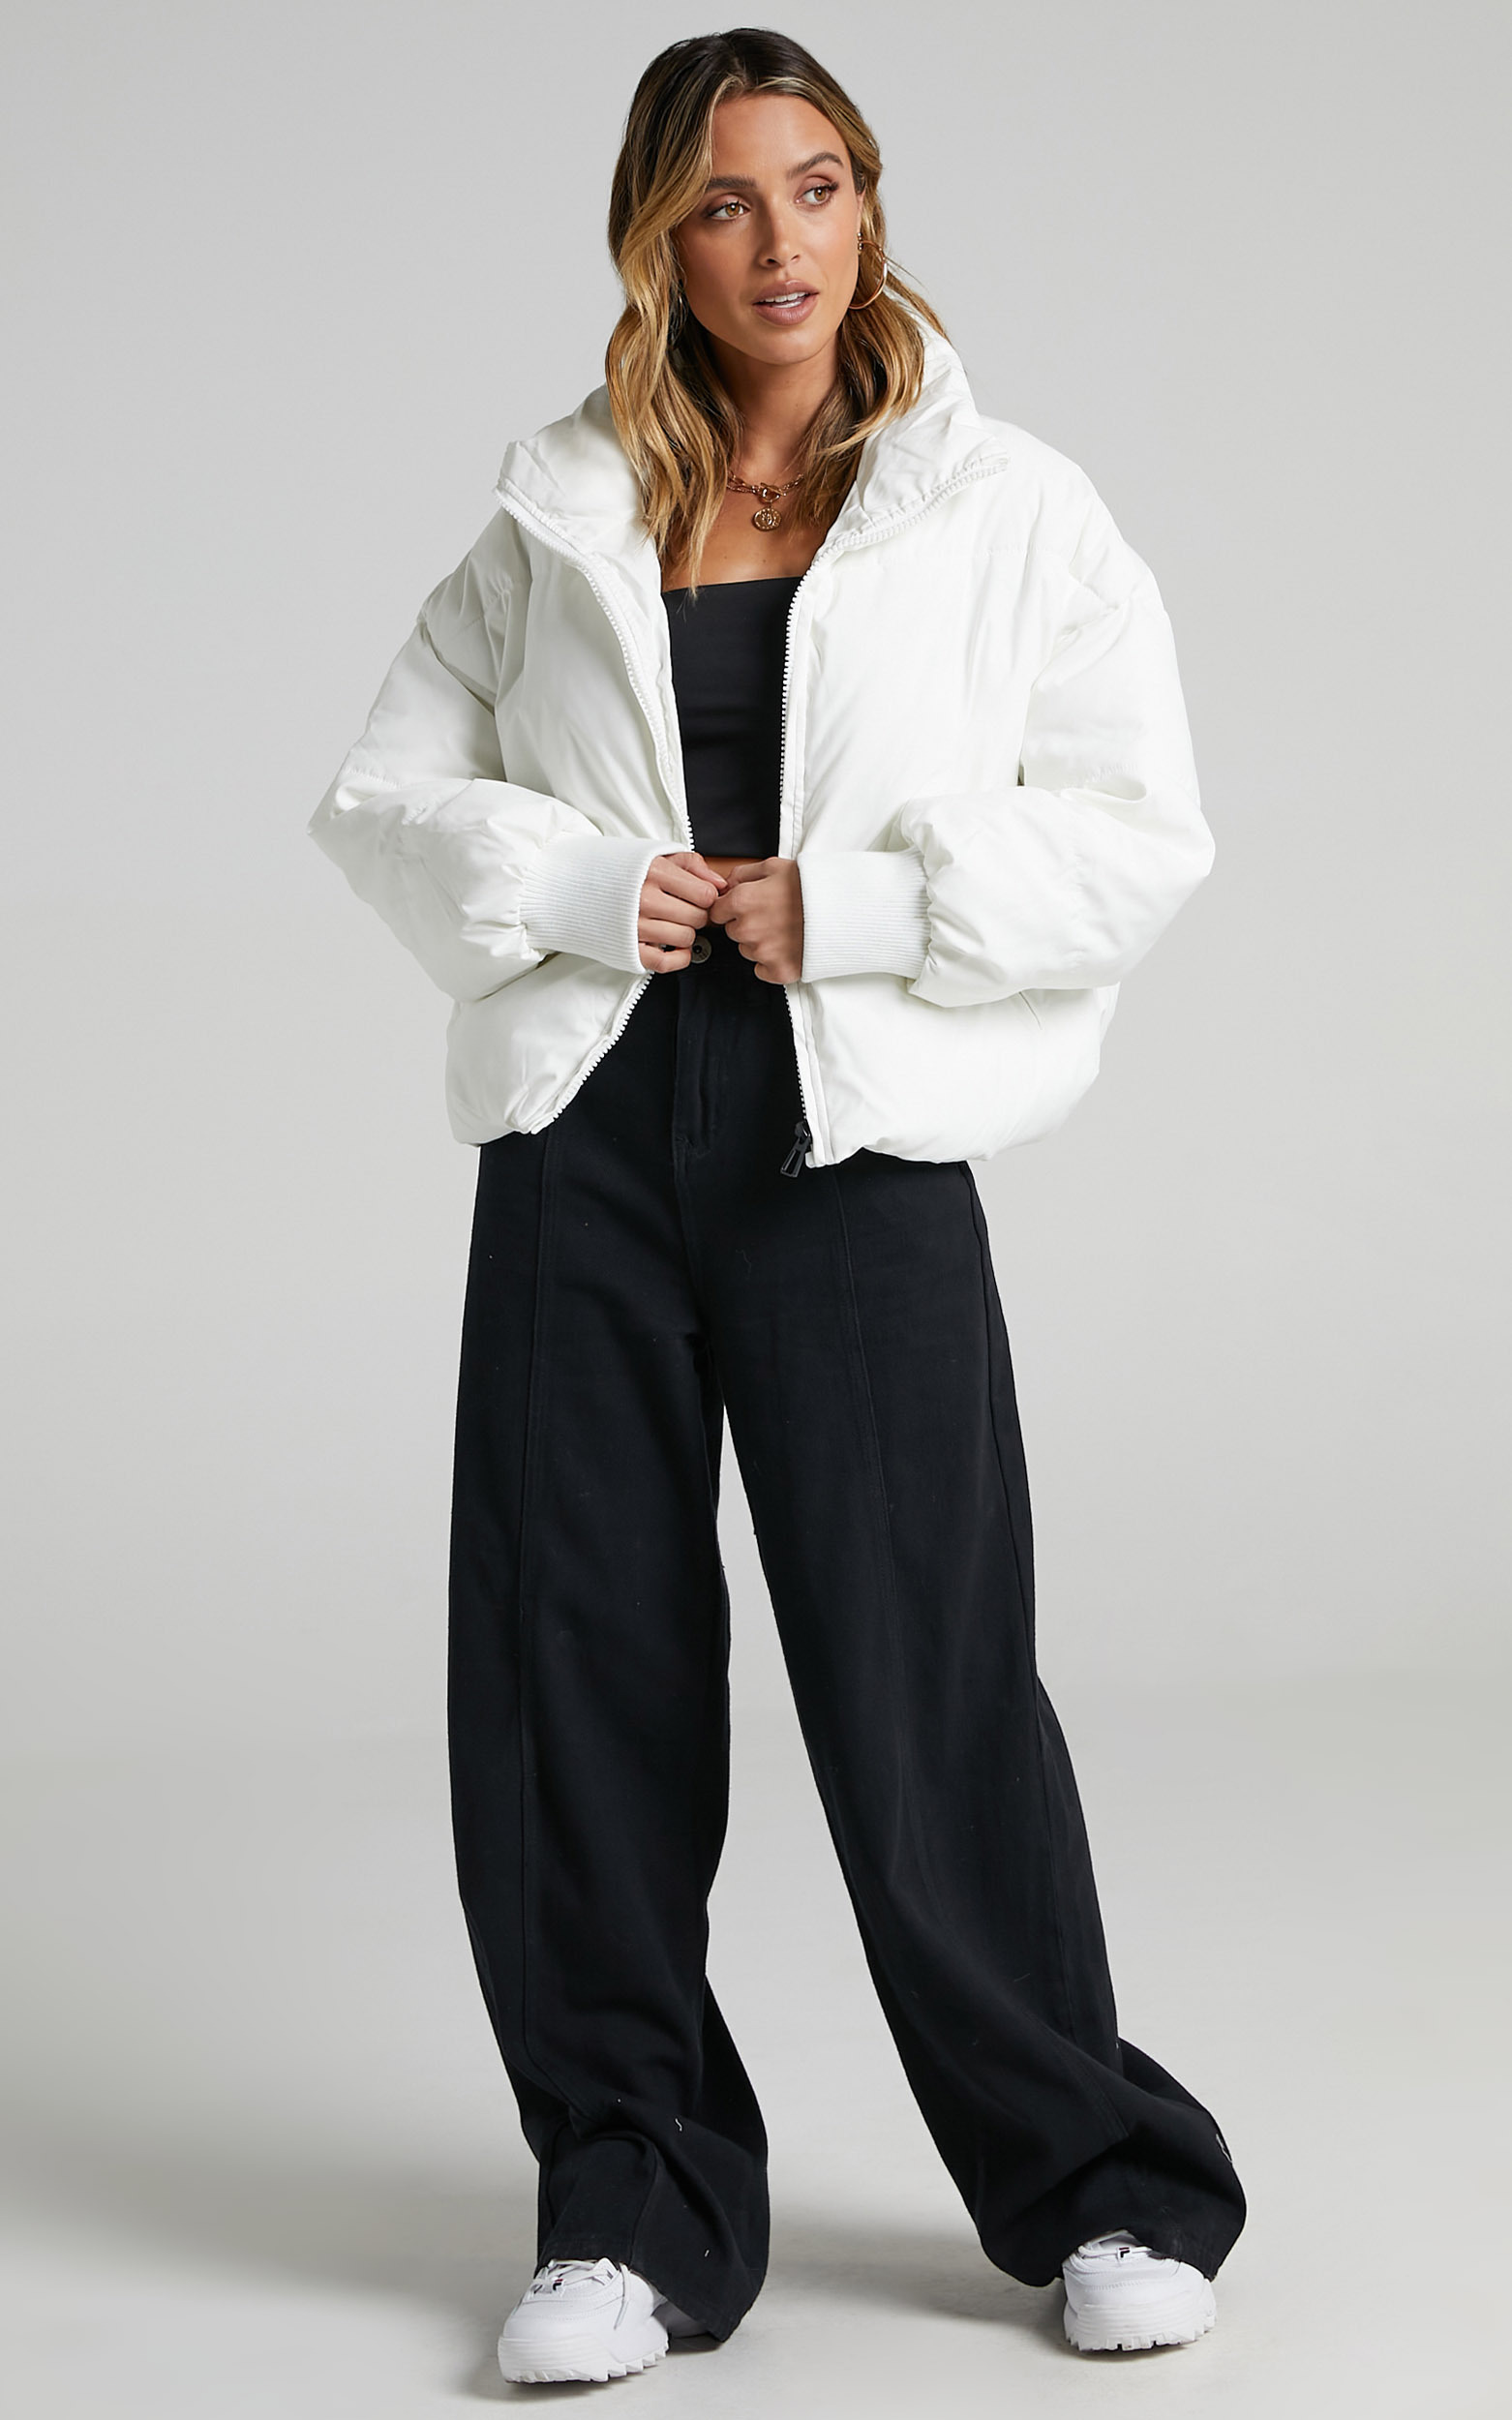 Windsor Puffer Jacket in White - 06, WHT7, hi-res image number null